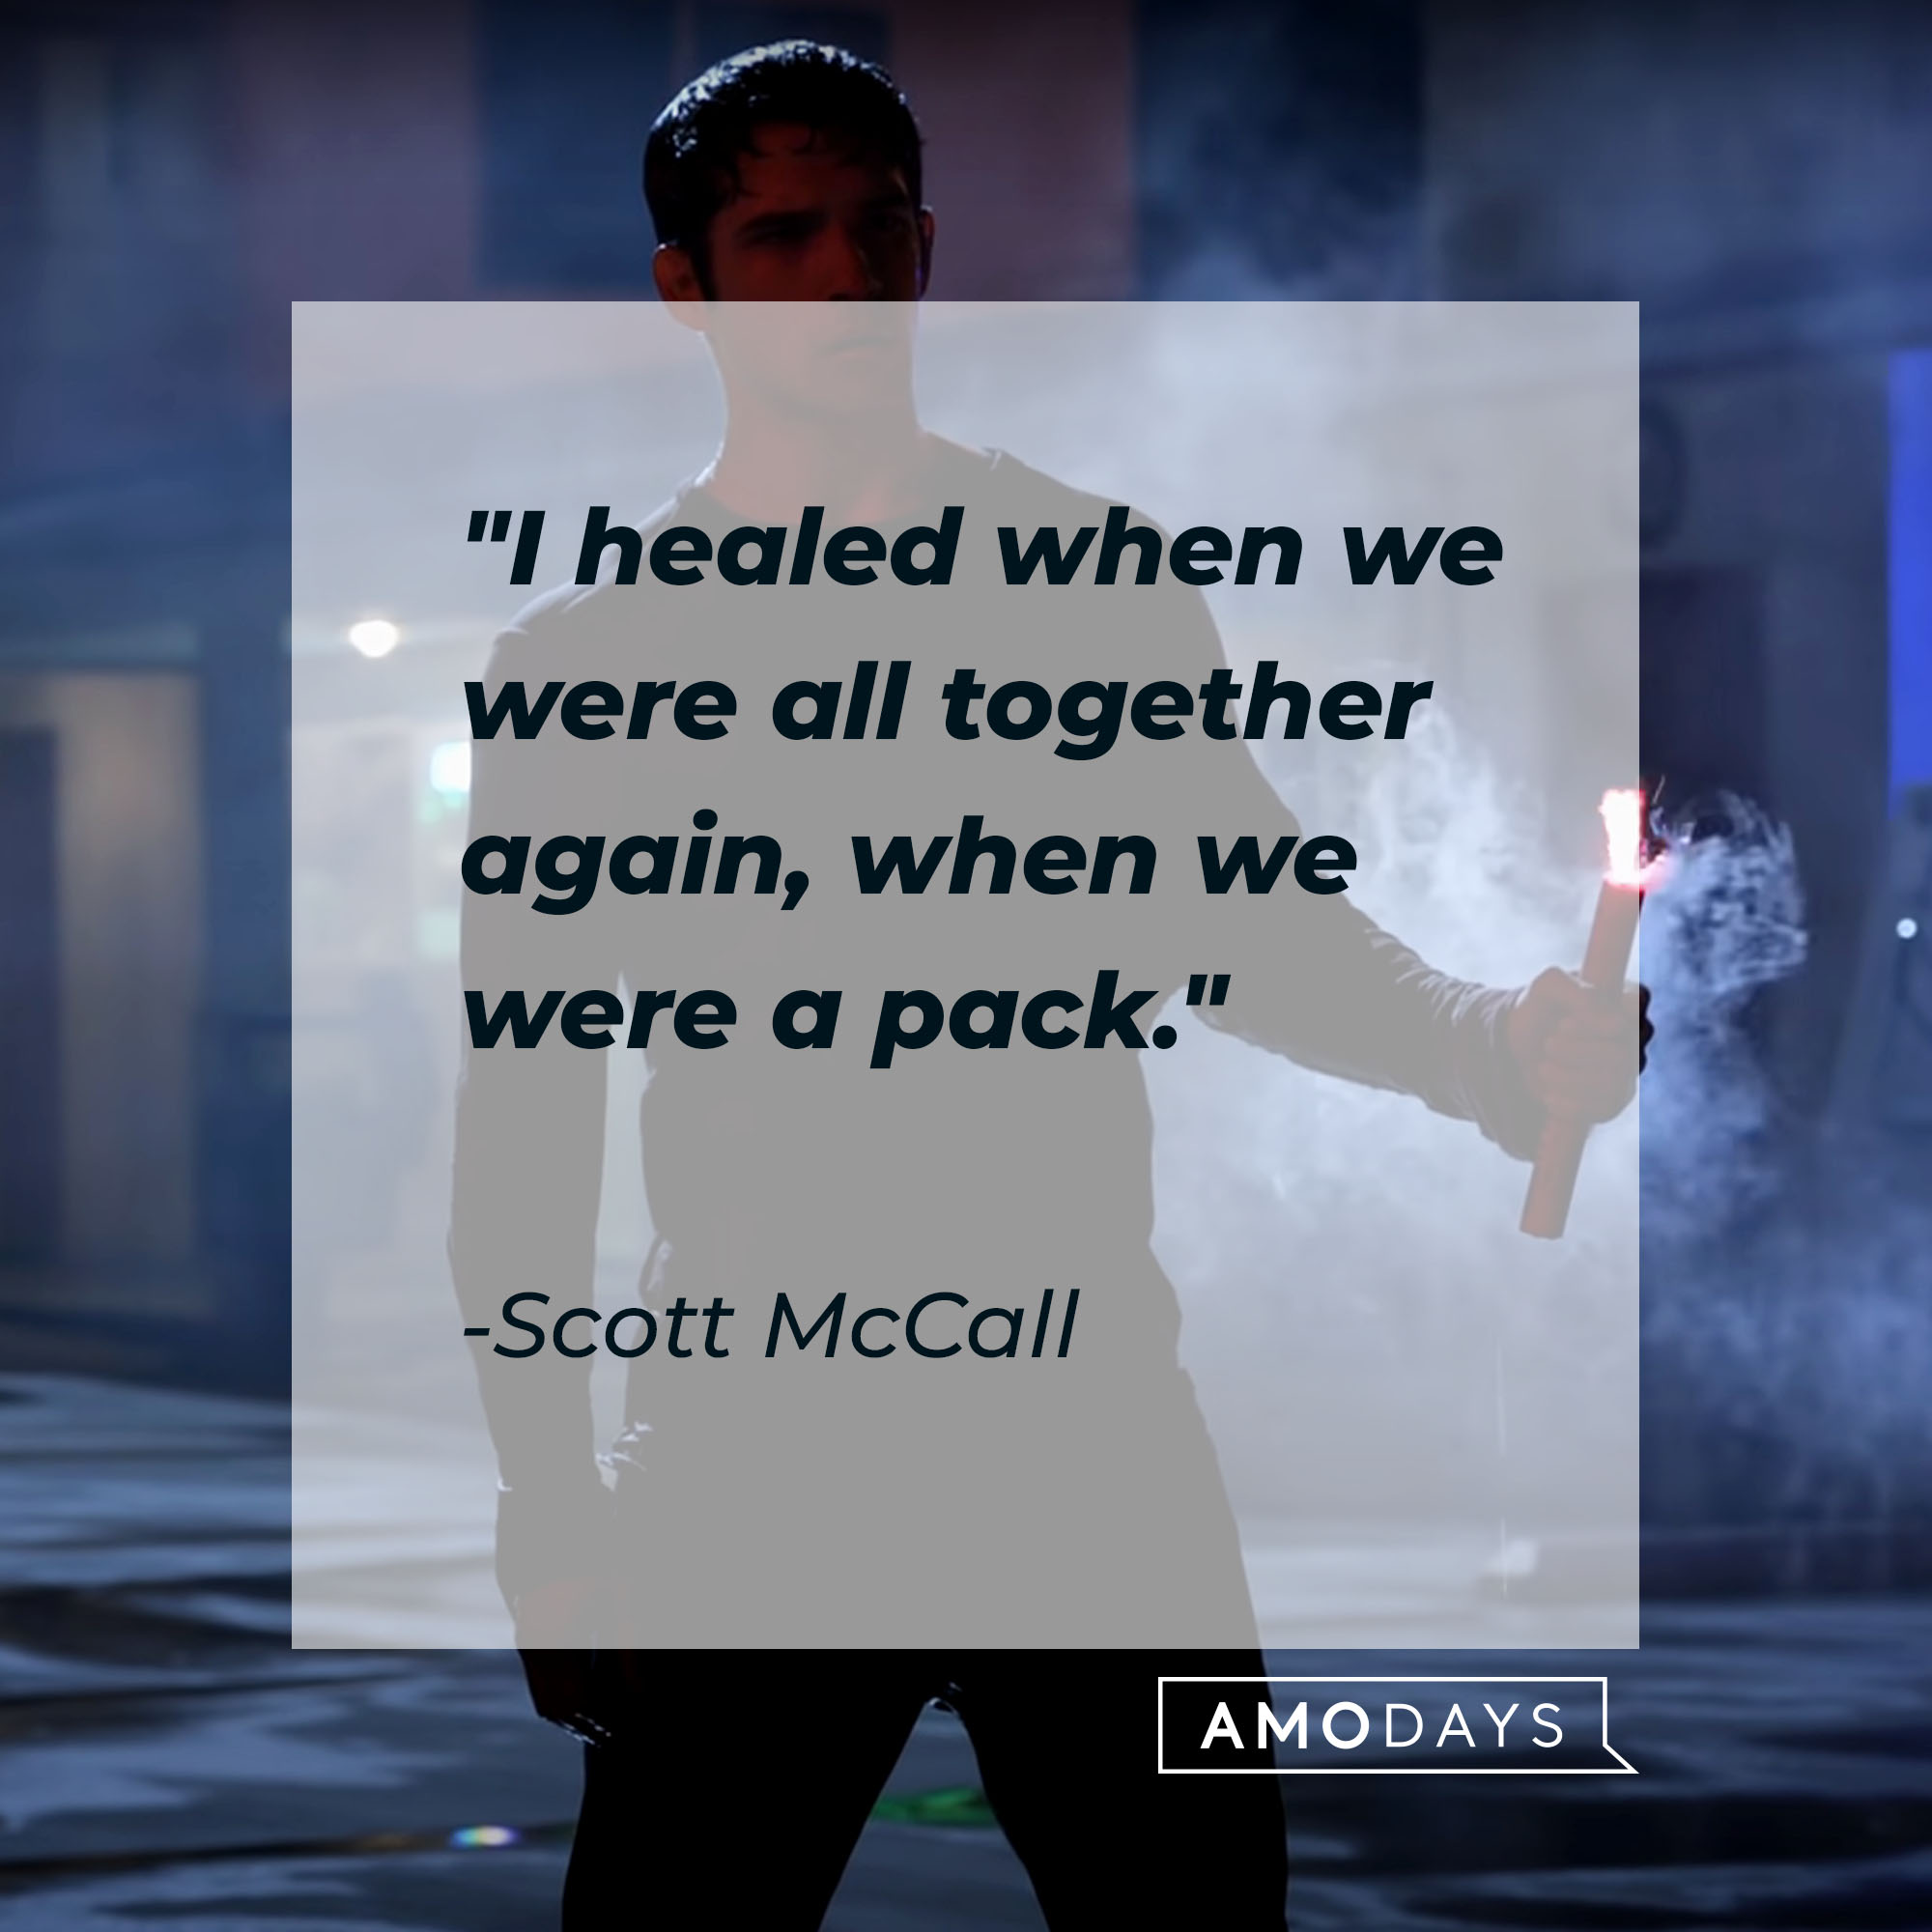 Scott McCall's quote: " I healed when we were all together again, when we were a pack" | Source: Youtube.com/WolfWatch